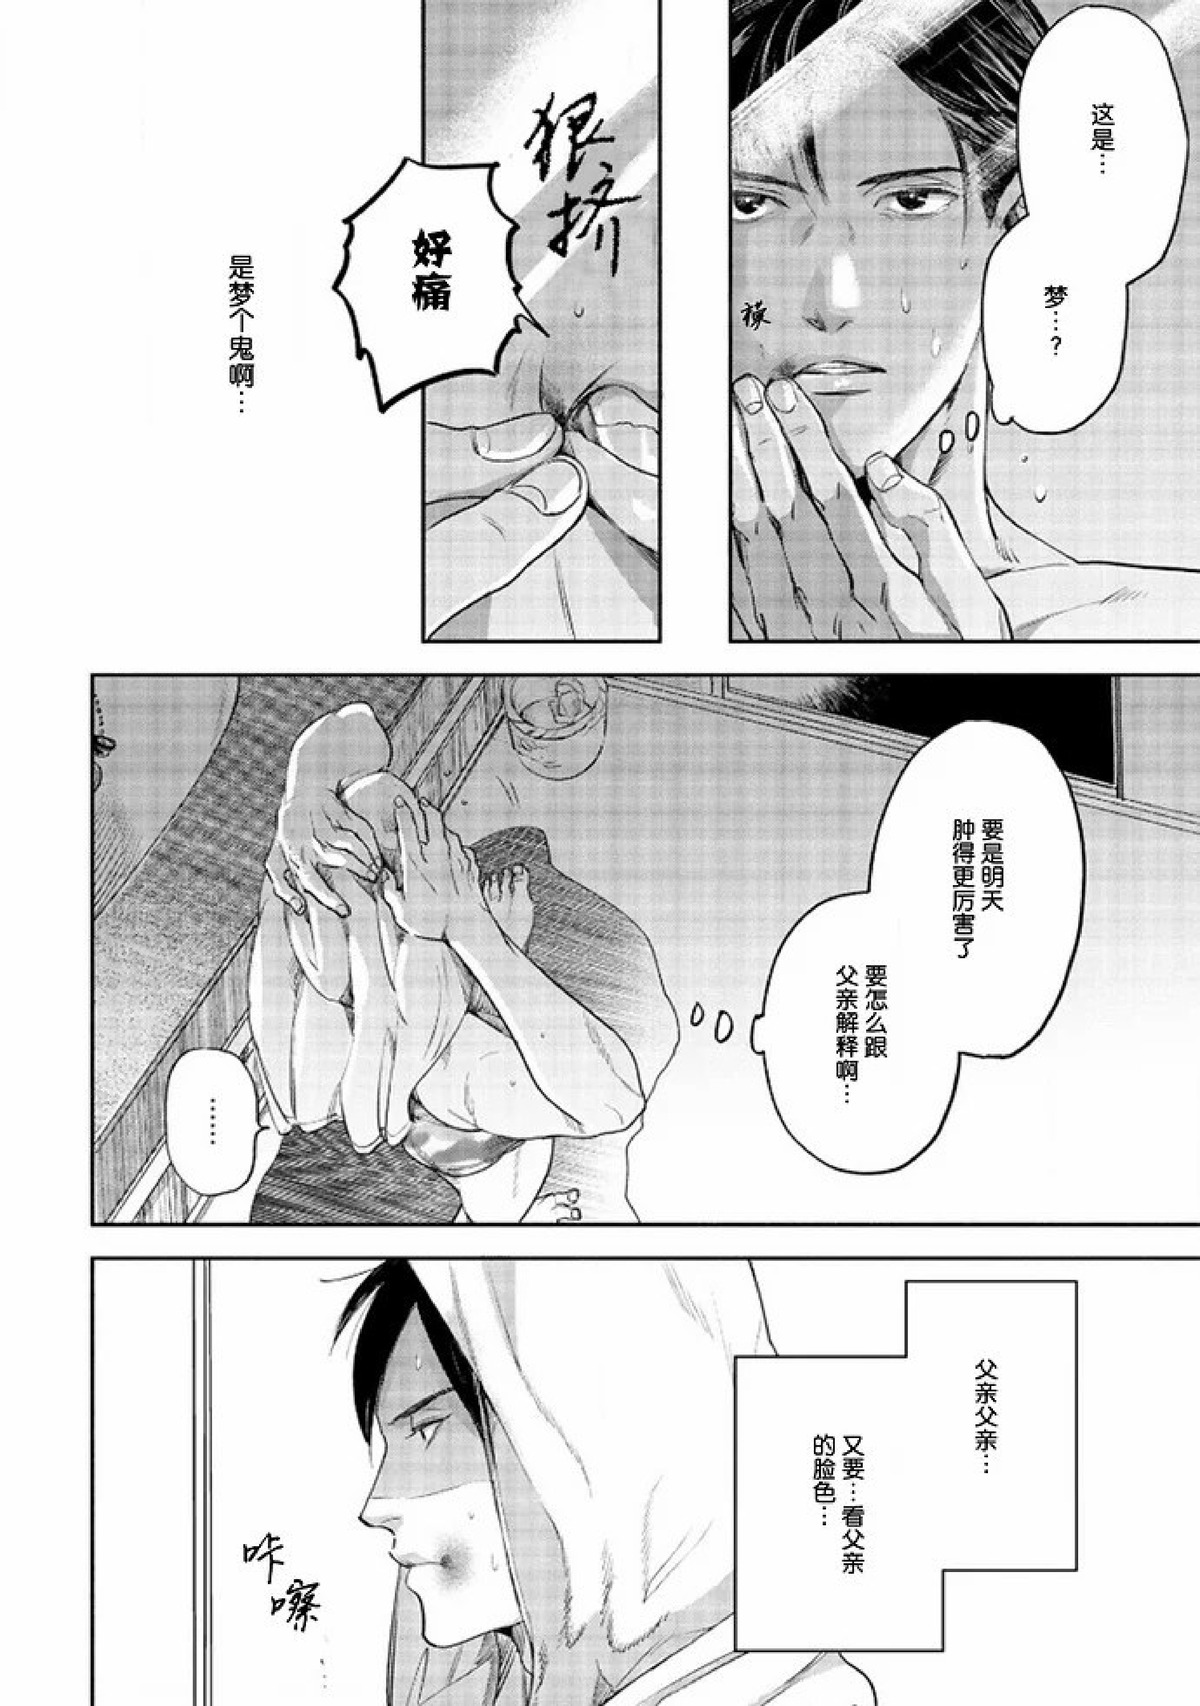 【Two sides of the same coin[耽美]】漫画-（上卷01-02）章节漫画下拉式图片-84.jpg